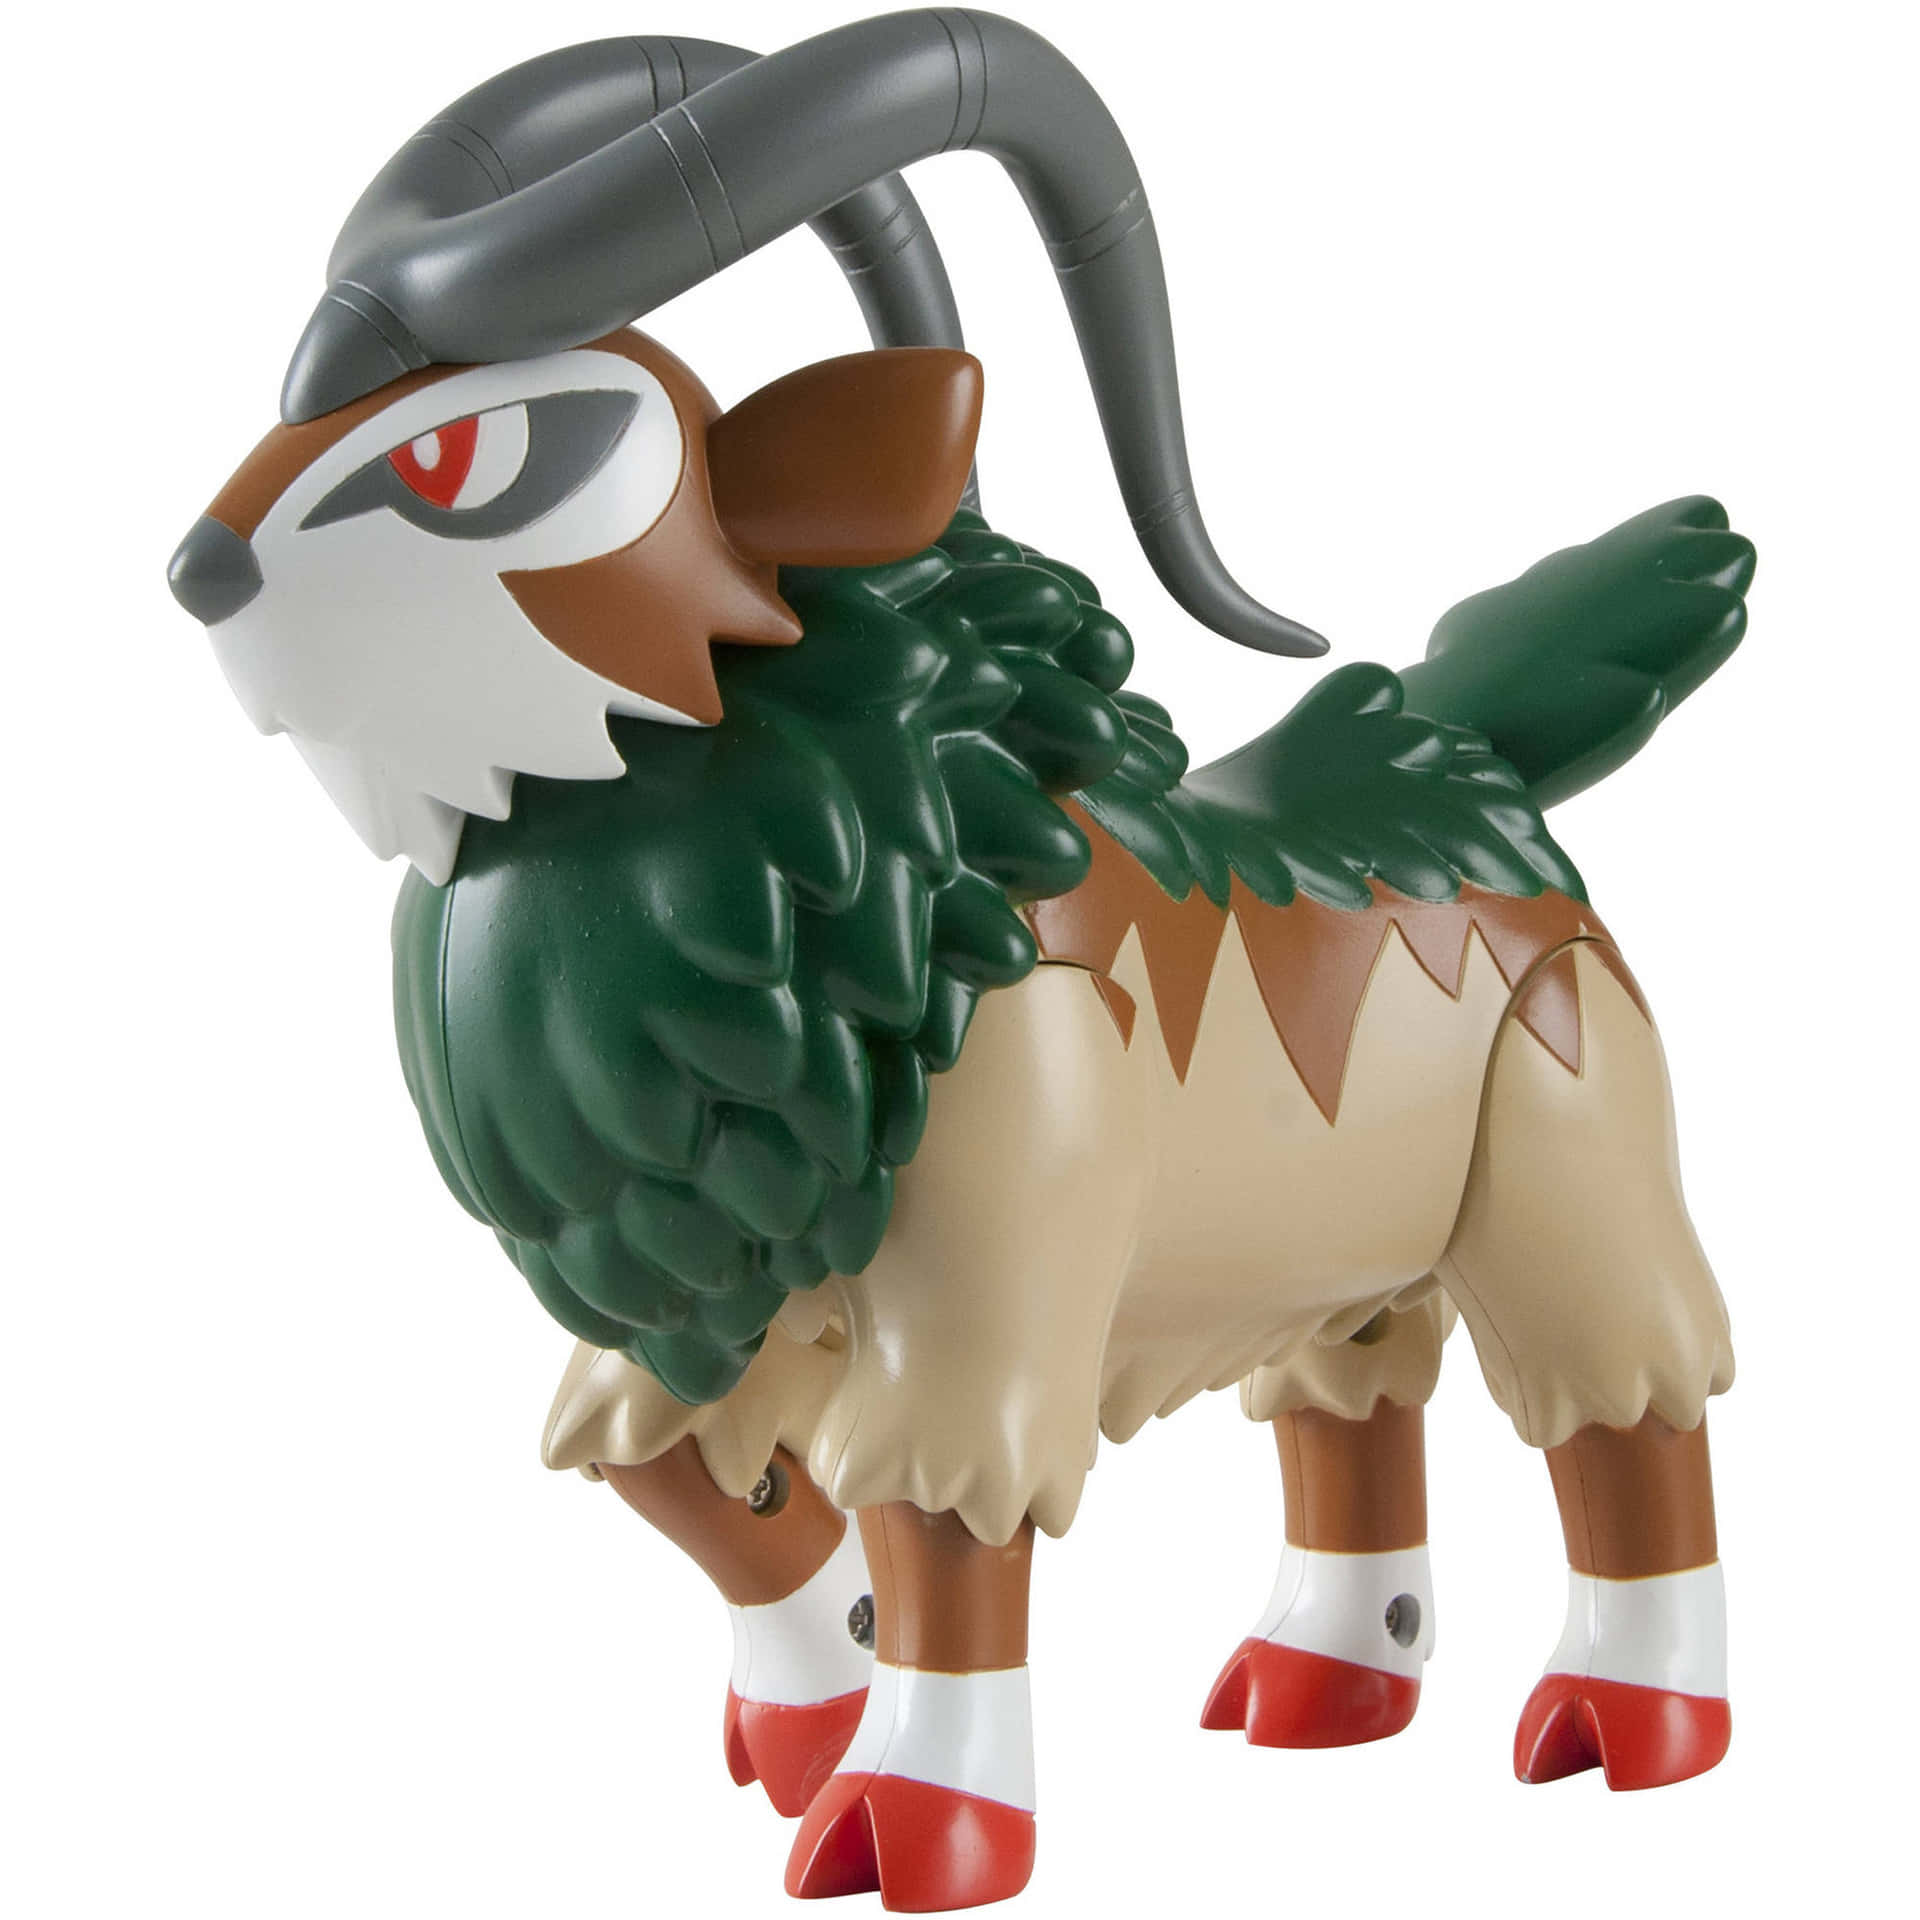 Adorable Gogoat Toy on a White Background Wallpaper